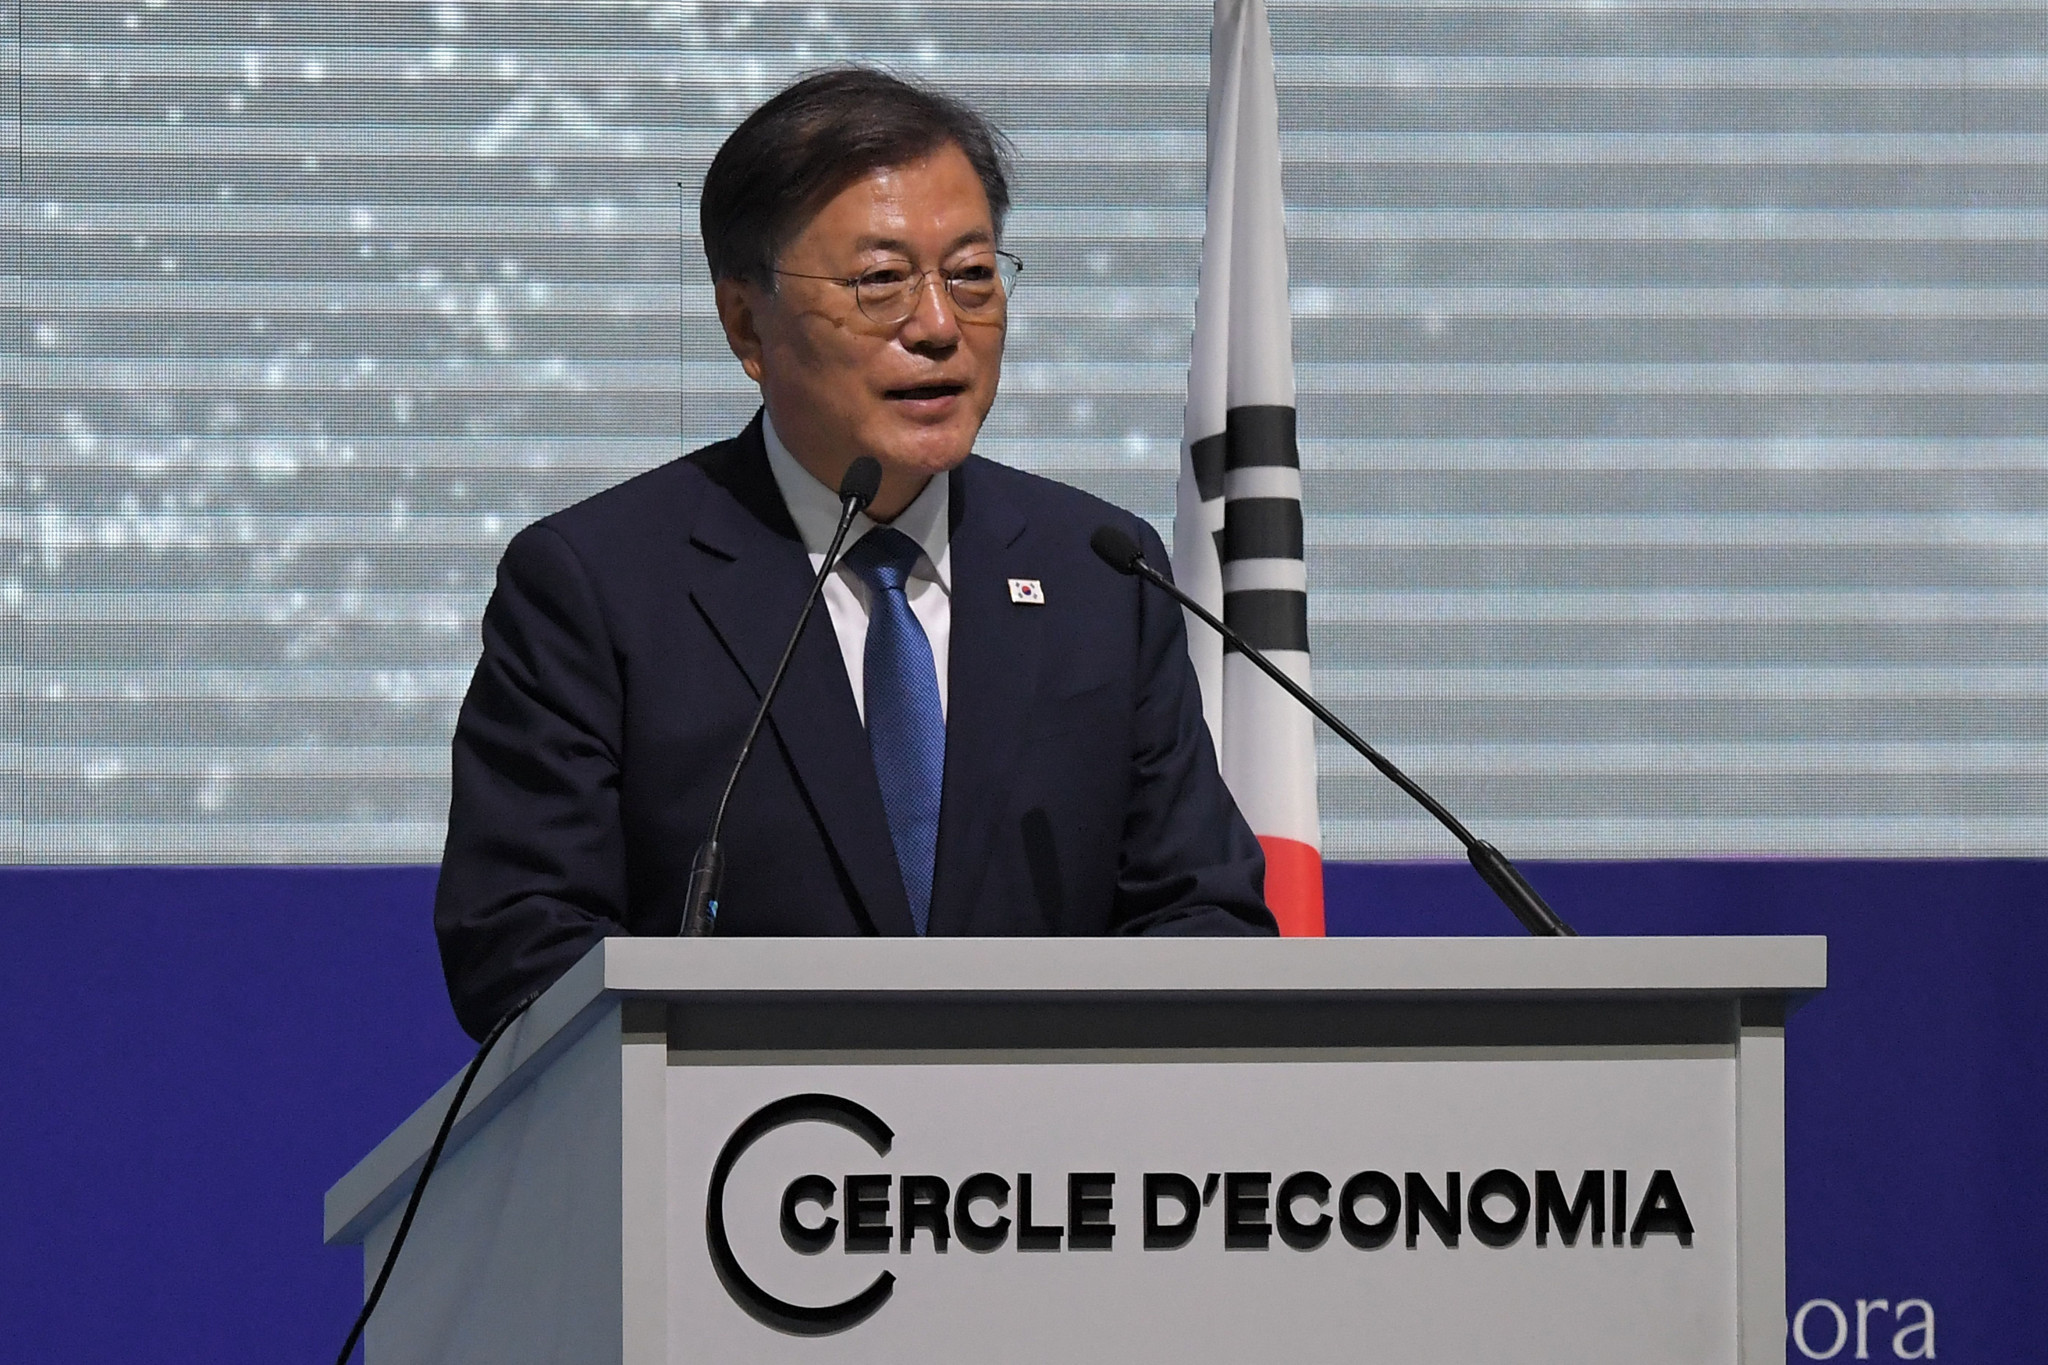 South Korean President Moon could attend Tokyo 2020 Opening Ceremony